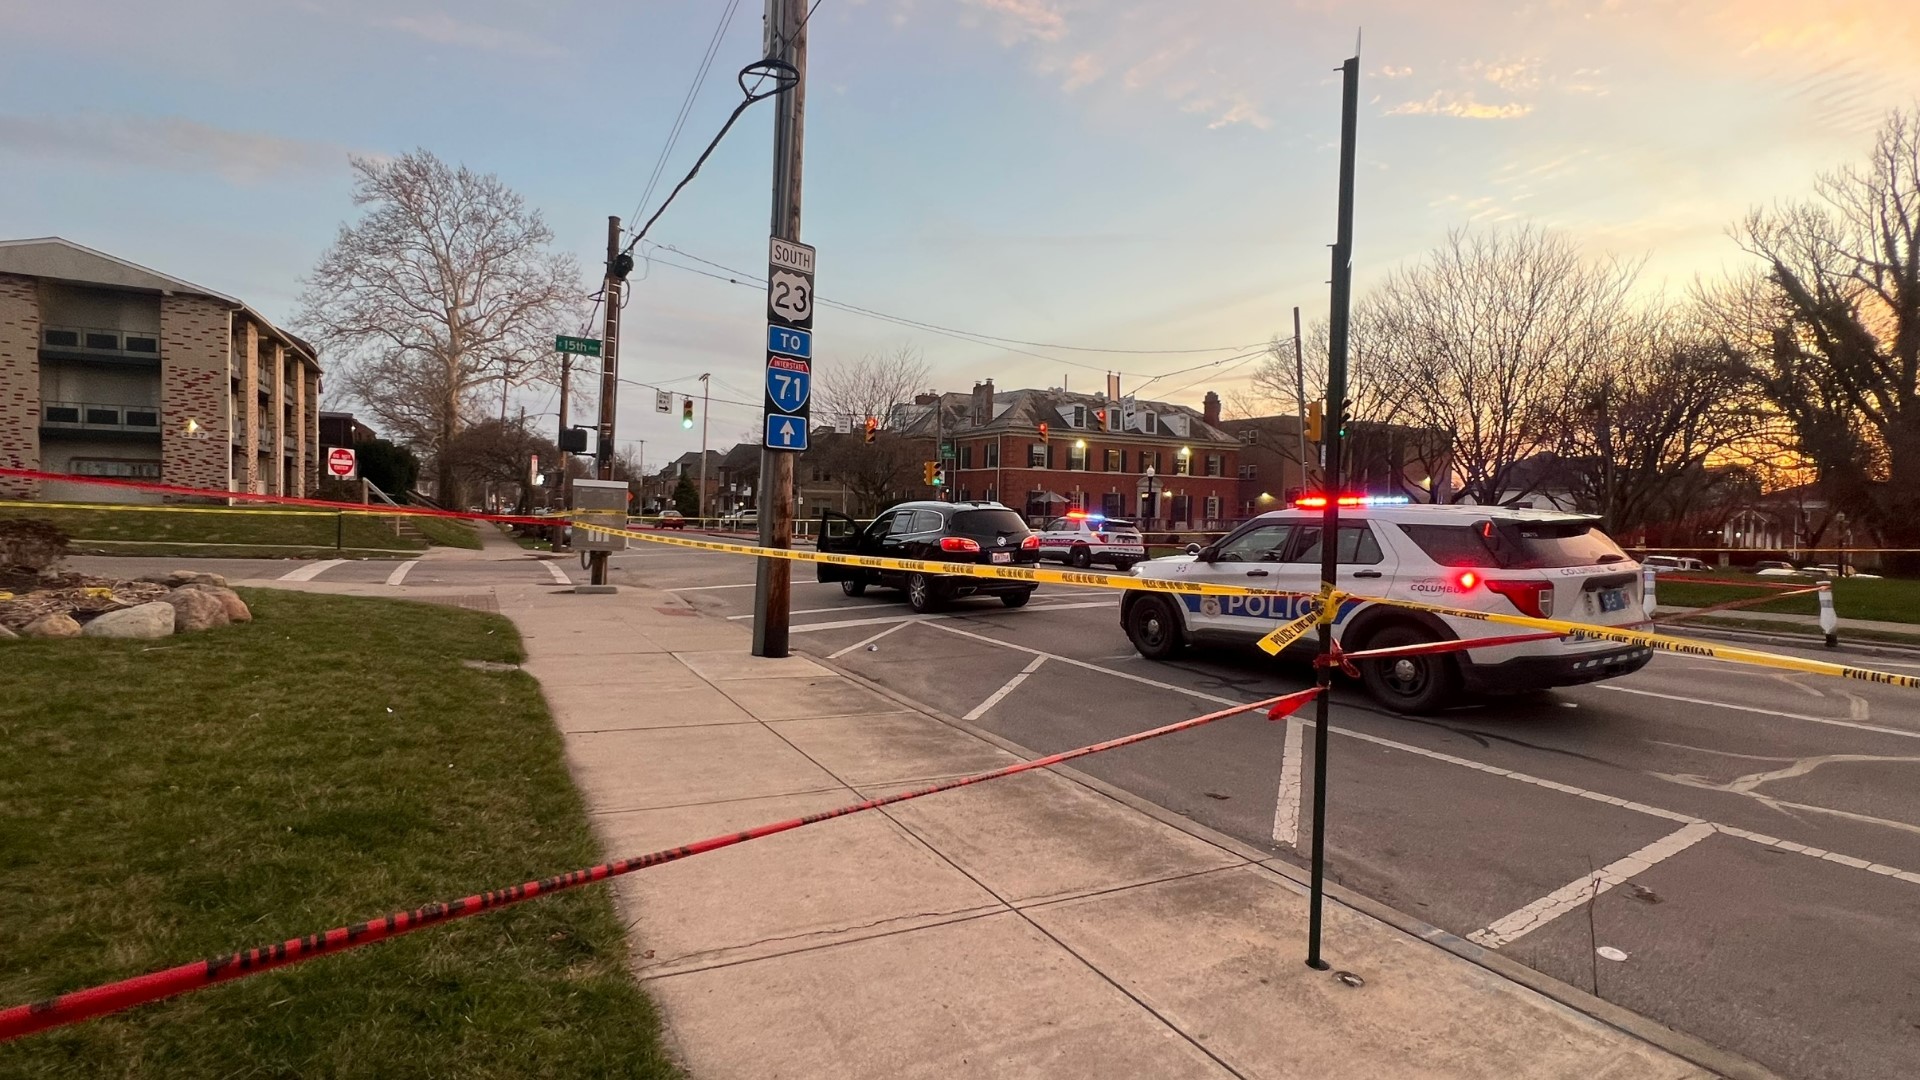 A 14-year-old boy is accused of shooting a woman who police say accidentally ran over a dog in the University District.